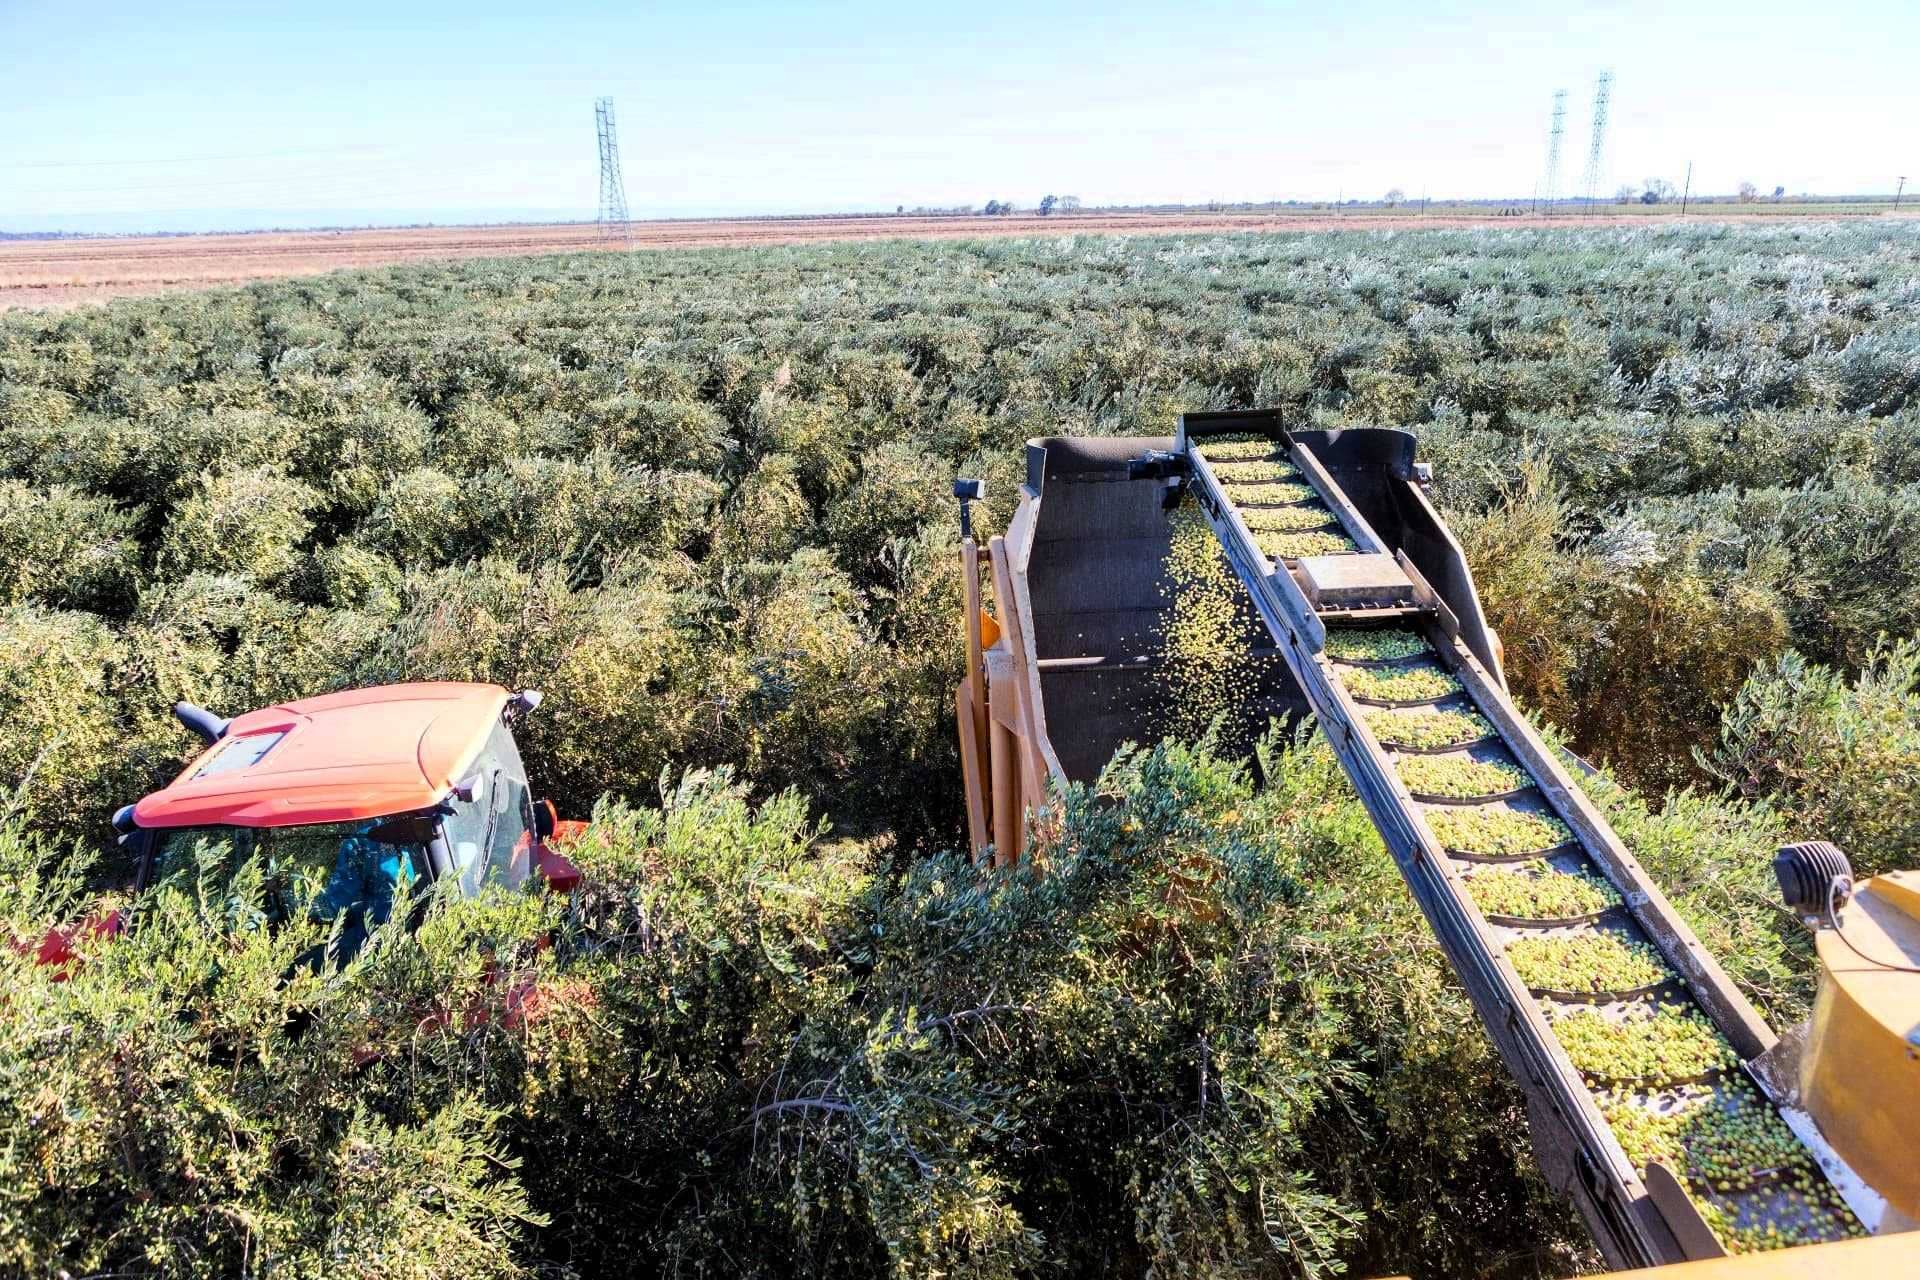 north-america-profiles-production-the-best-olive-oils-family-behind-organic-roots-adapts-as-california-drought-refuses-to-break-olive-oil-times